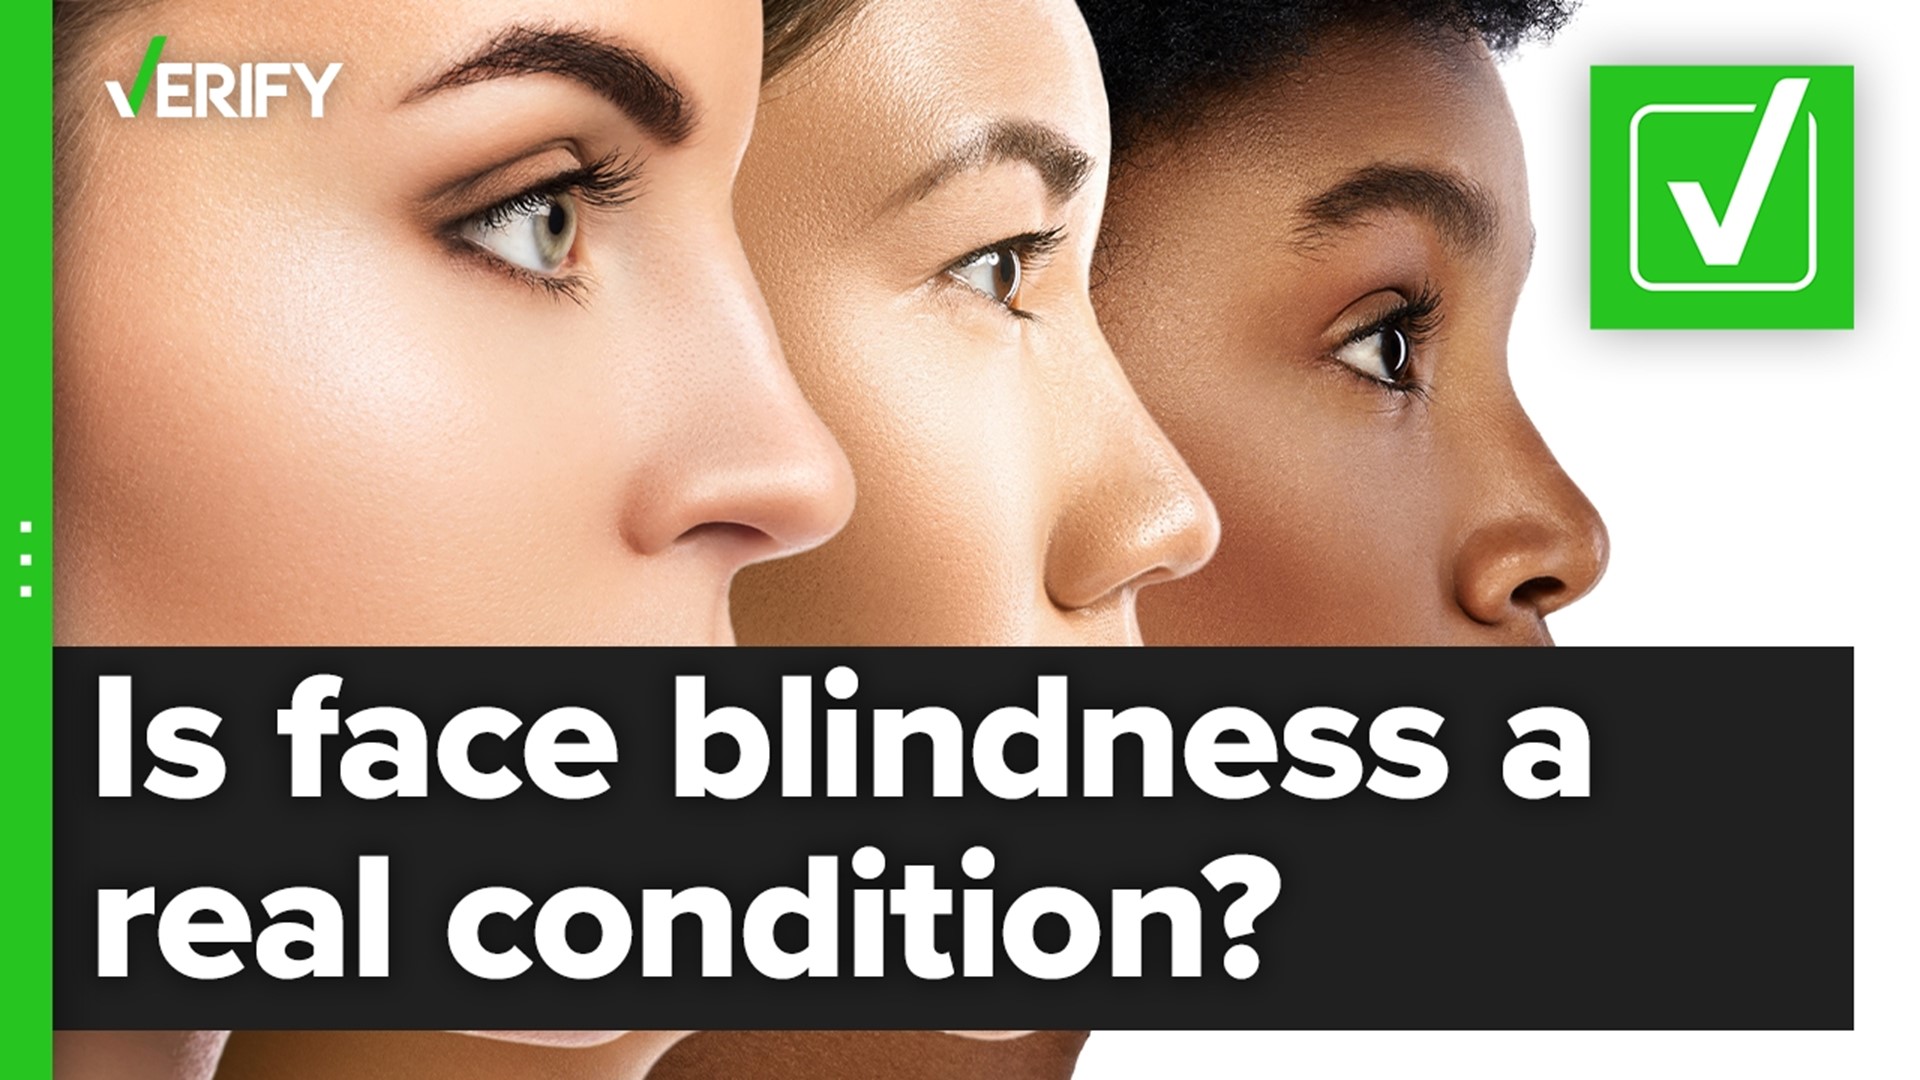 Is face blindness a real condition? The VERIFY team confirms this is true.